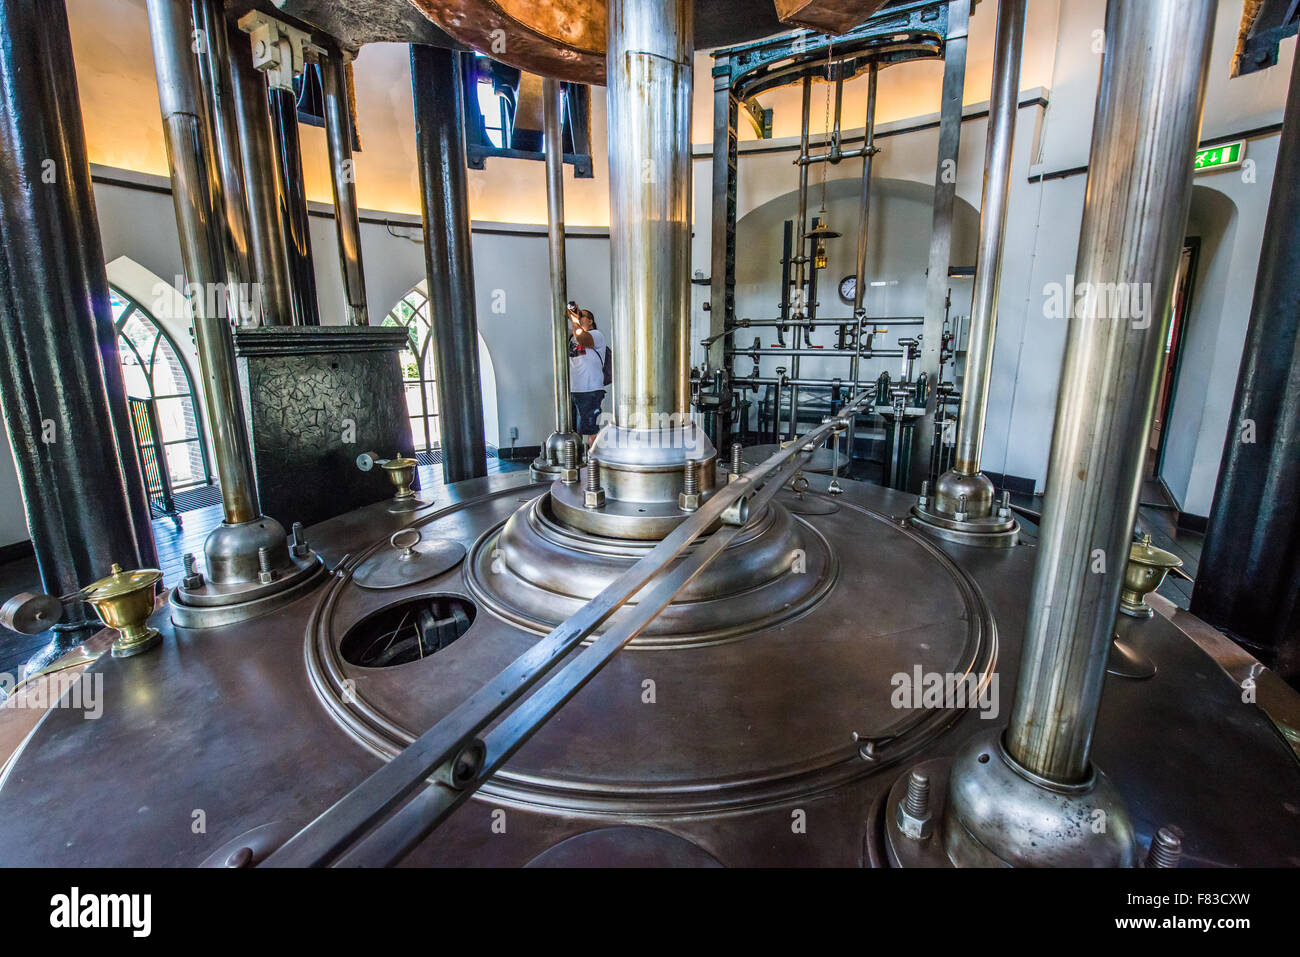 The Cruquius Pumping station with his massive steam pump a beautiful example of mechanical engineering in the 19th century Stock Photo